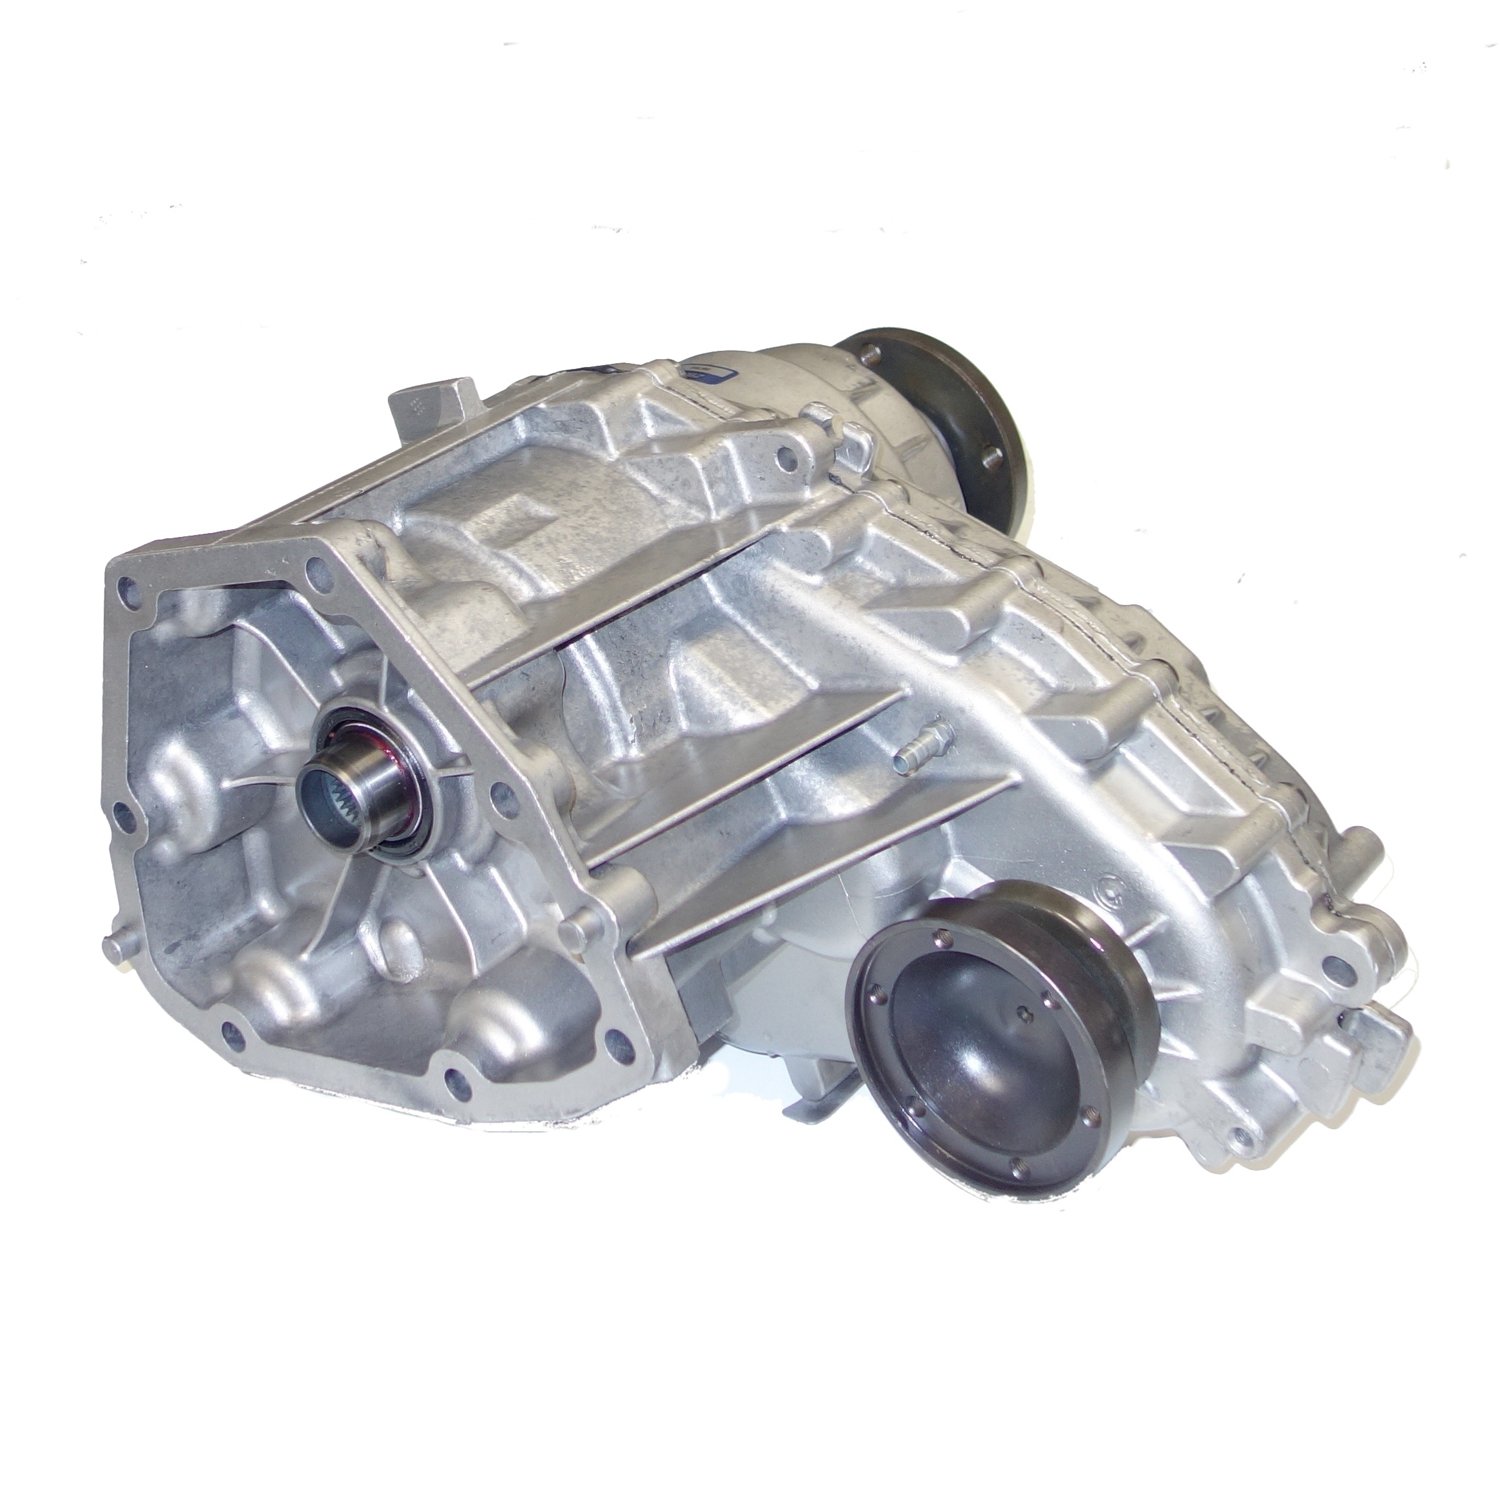 Remanufactured BW4412 Transfer Case for Ford 2006 Explorer & Mountaineer 4.0L, Single Speed AWD